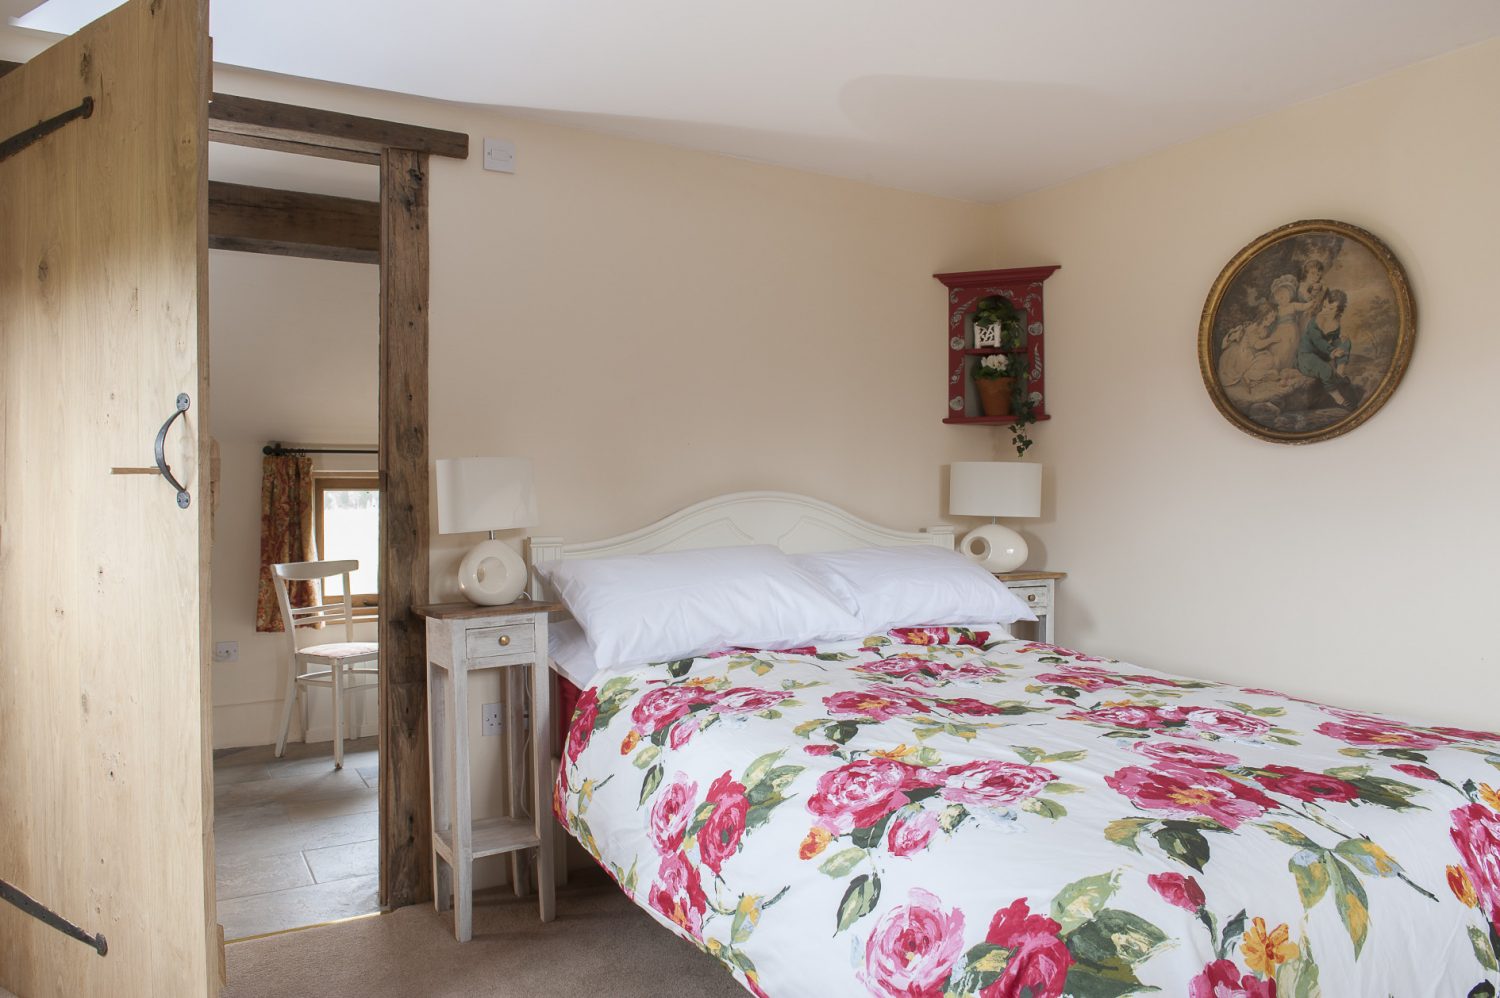 Downstairs in the main bedroom, two dining chairs have been painted white and recovered in Beaumont & Fletcher. Caroline found the corbel on one wall at Symonds Salvage in Pluckley and the distressed leather-topped writing desk at Rising Star in Tenterden